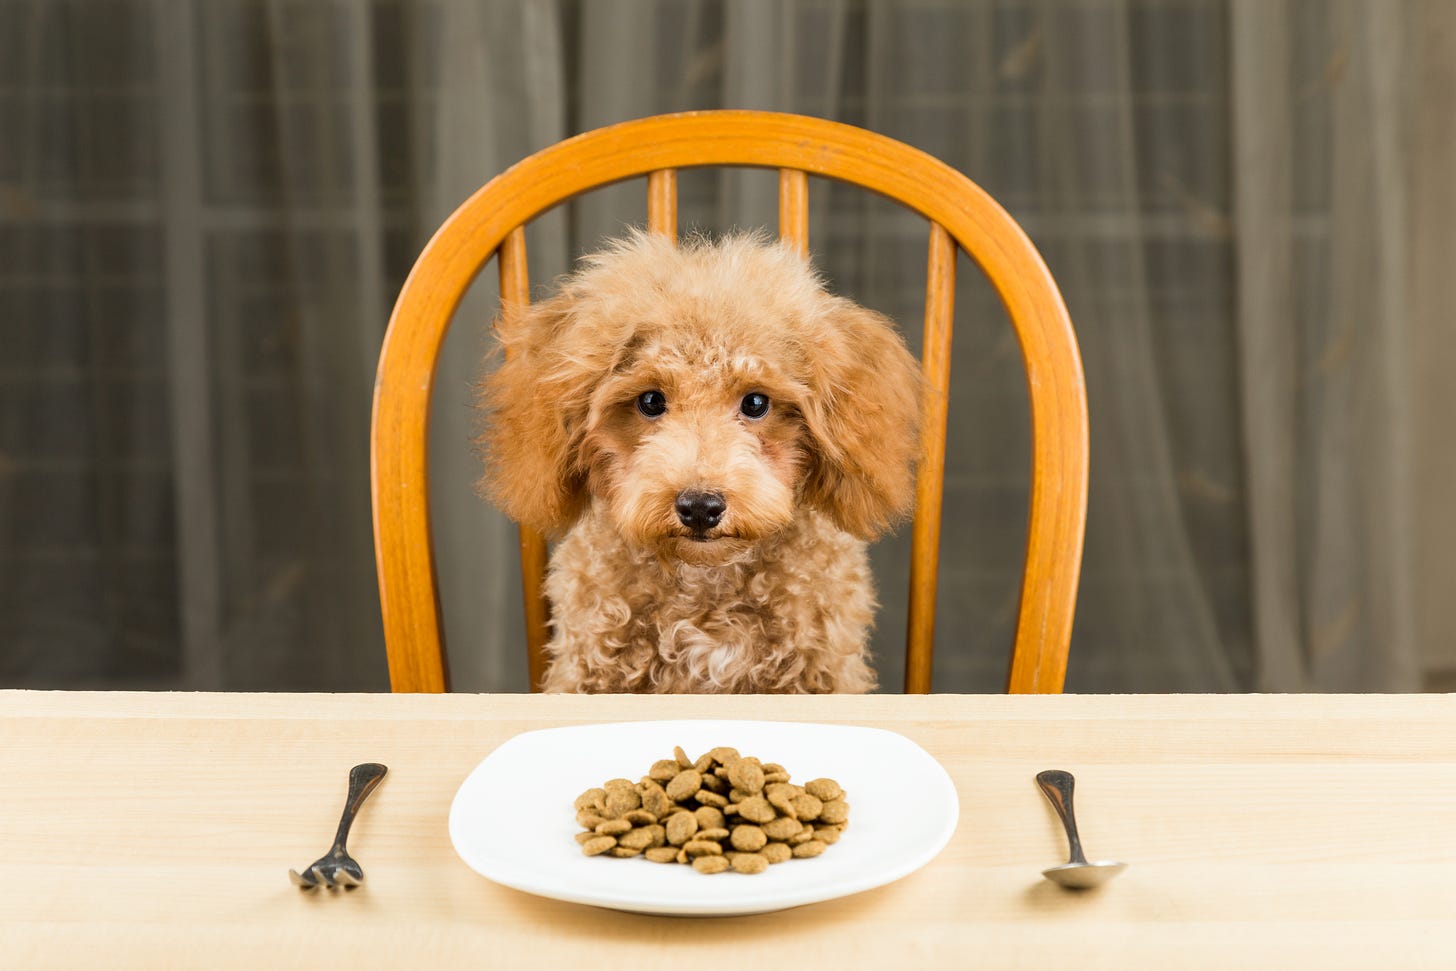 Apricot poodle at dining table, in front of spoon, fork and plate of kibble, looking forlorn to eat dry kibble.